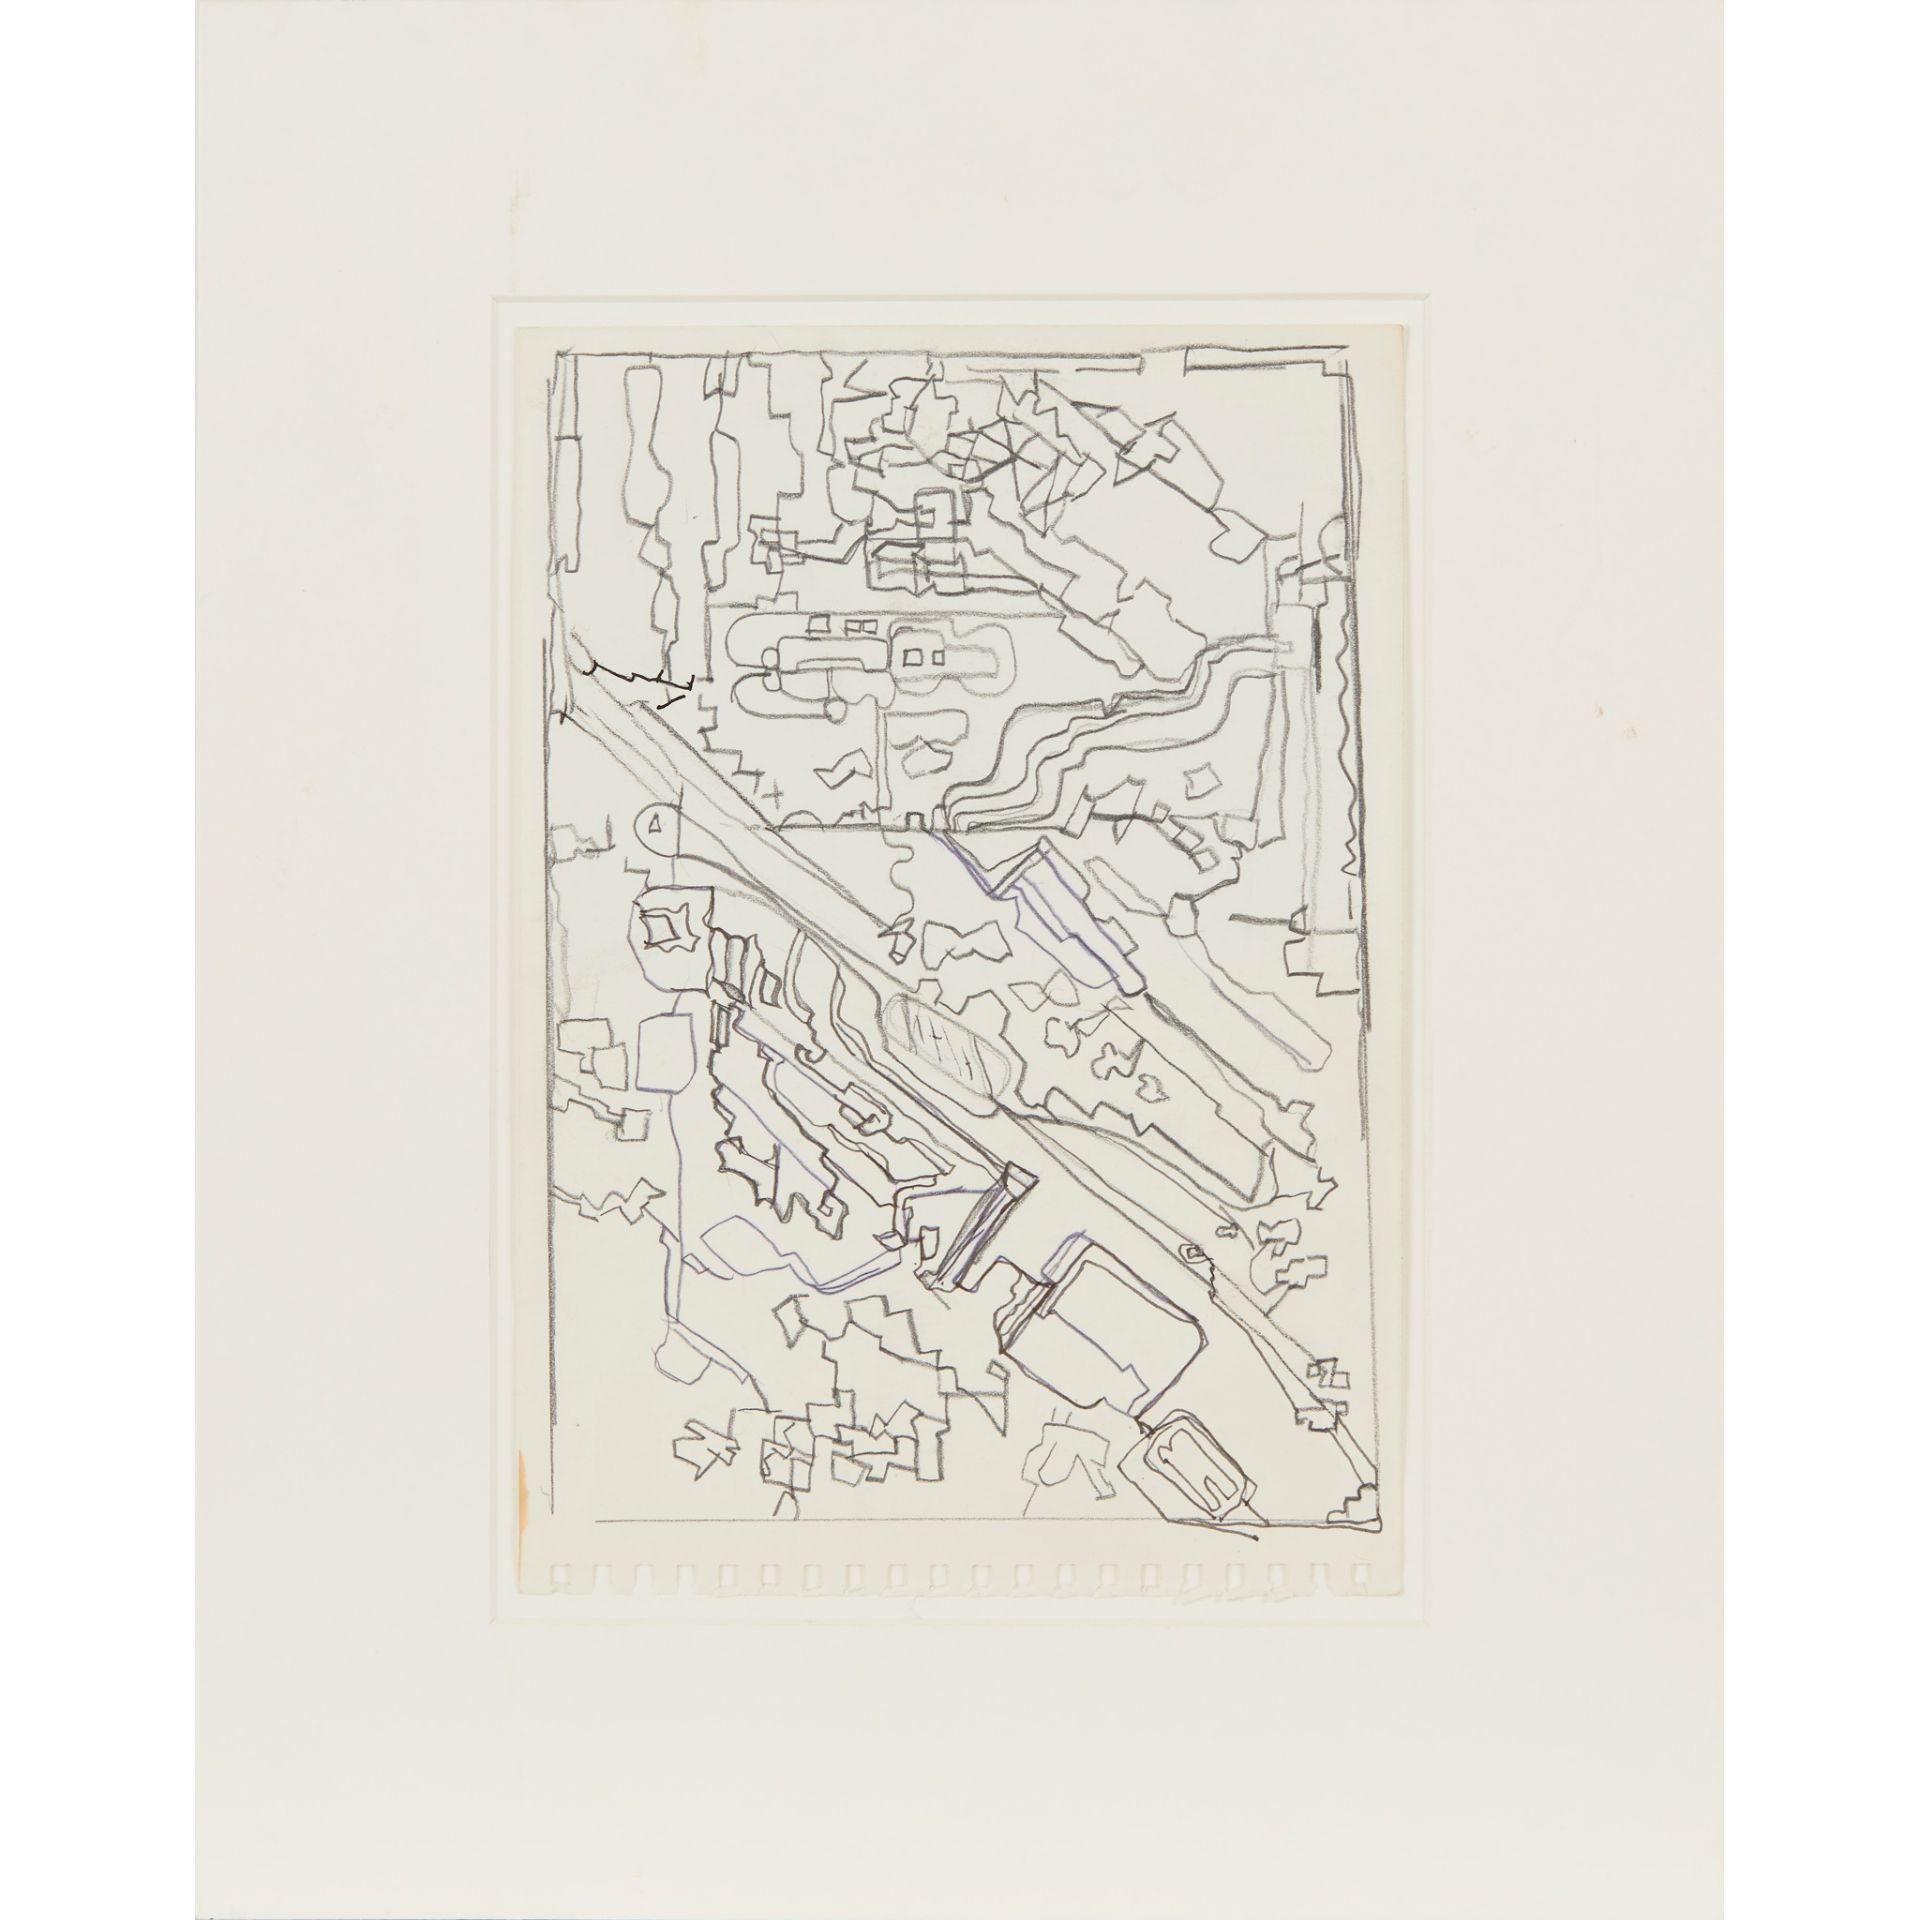 § EDUARDO PAOLOZZI K.B.E., R.A., H.R.S.A. (SCOTTISH 1924-2005) SKETCH WITH GREEN ELEMENTS - Image 2 of 2